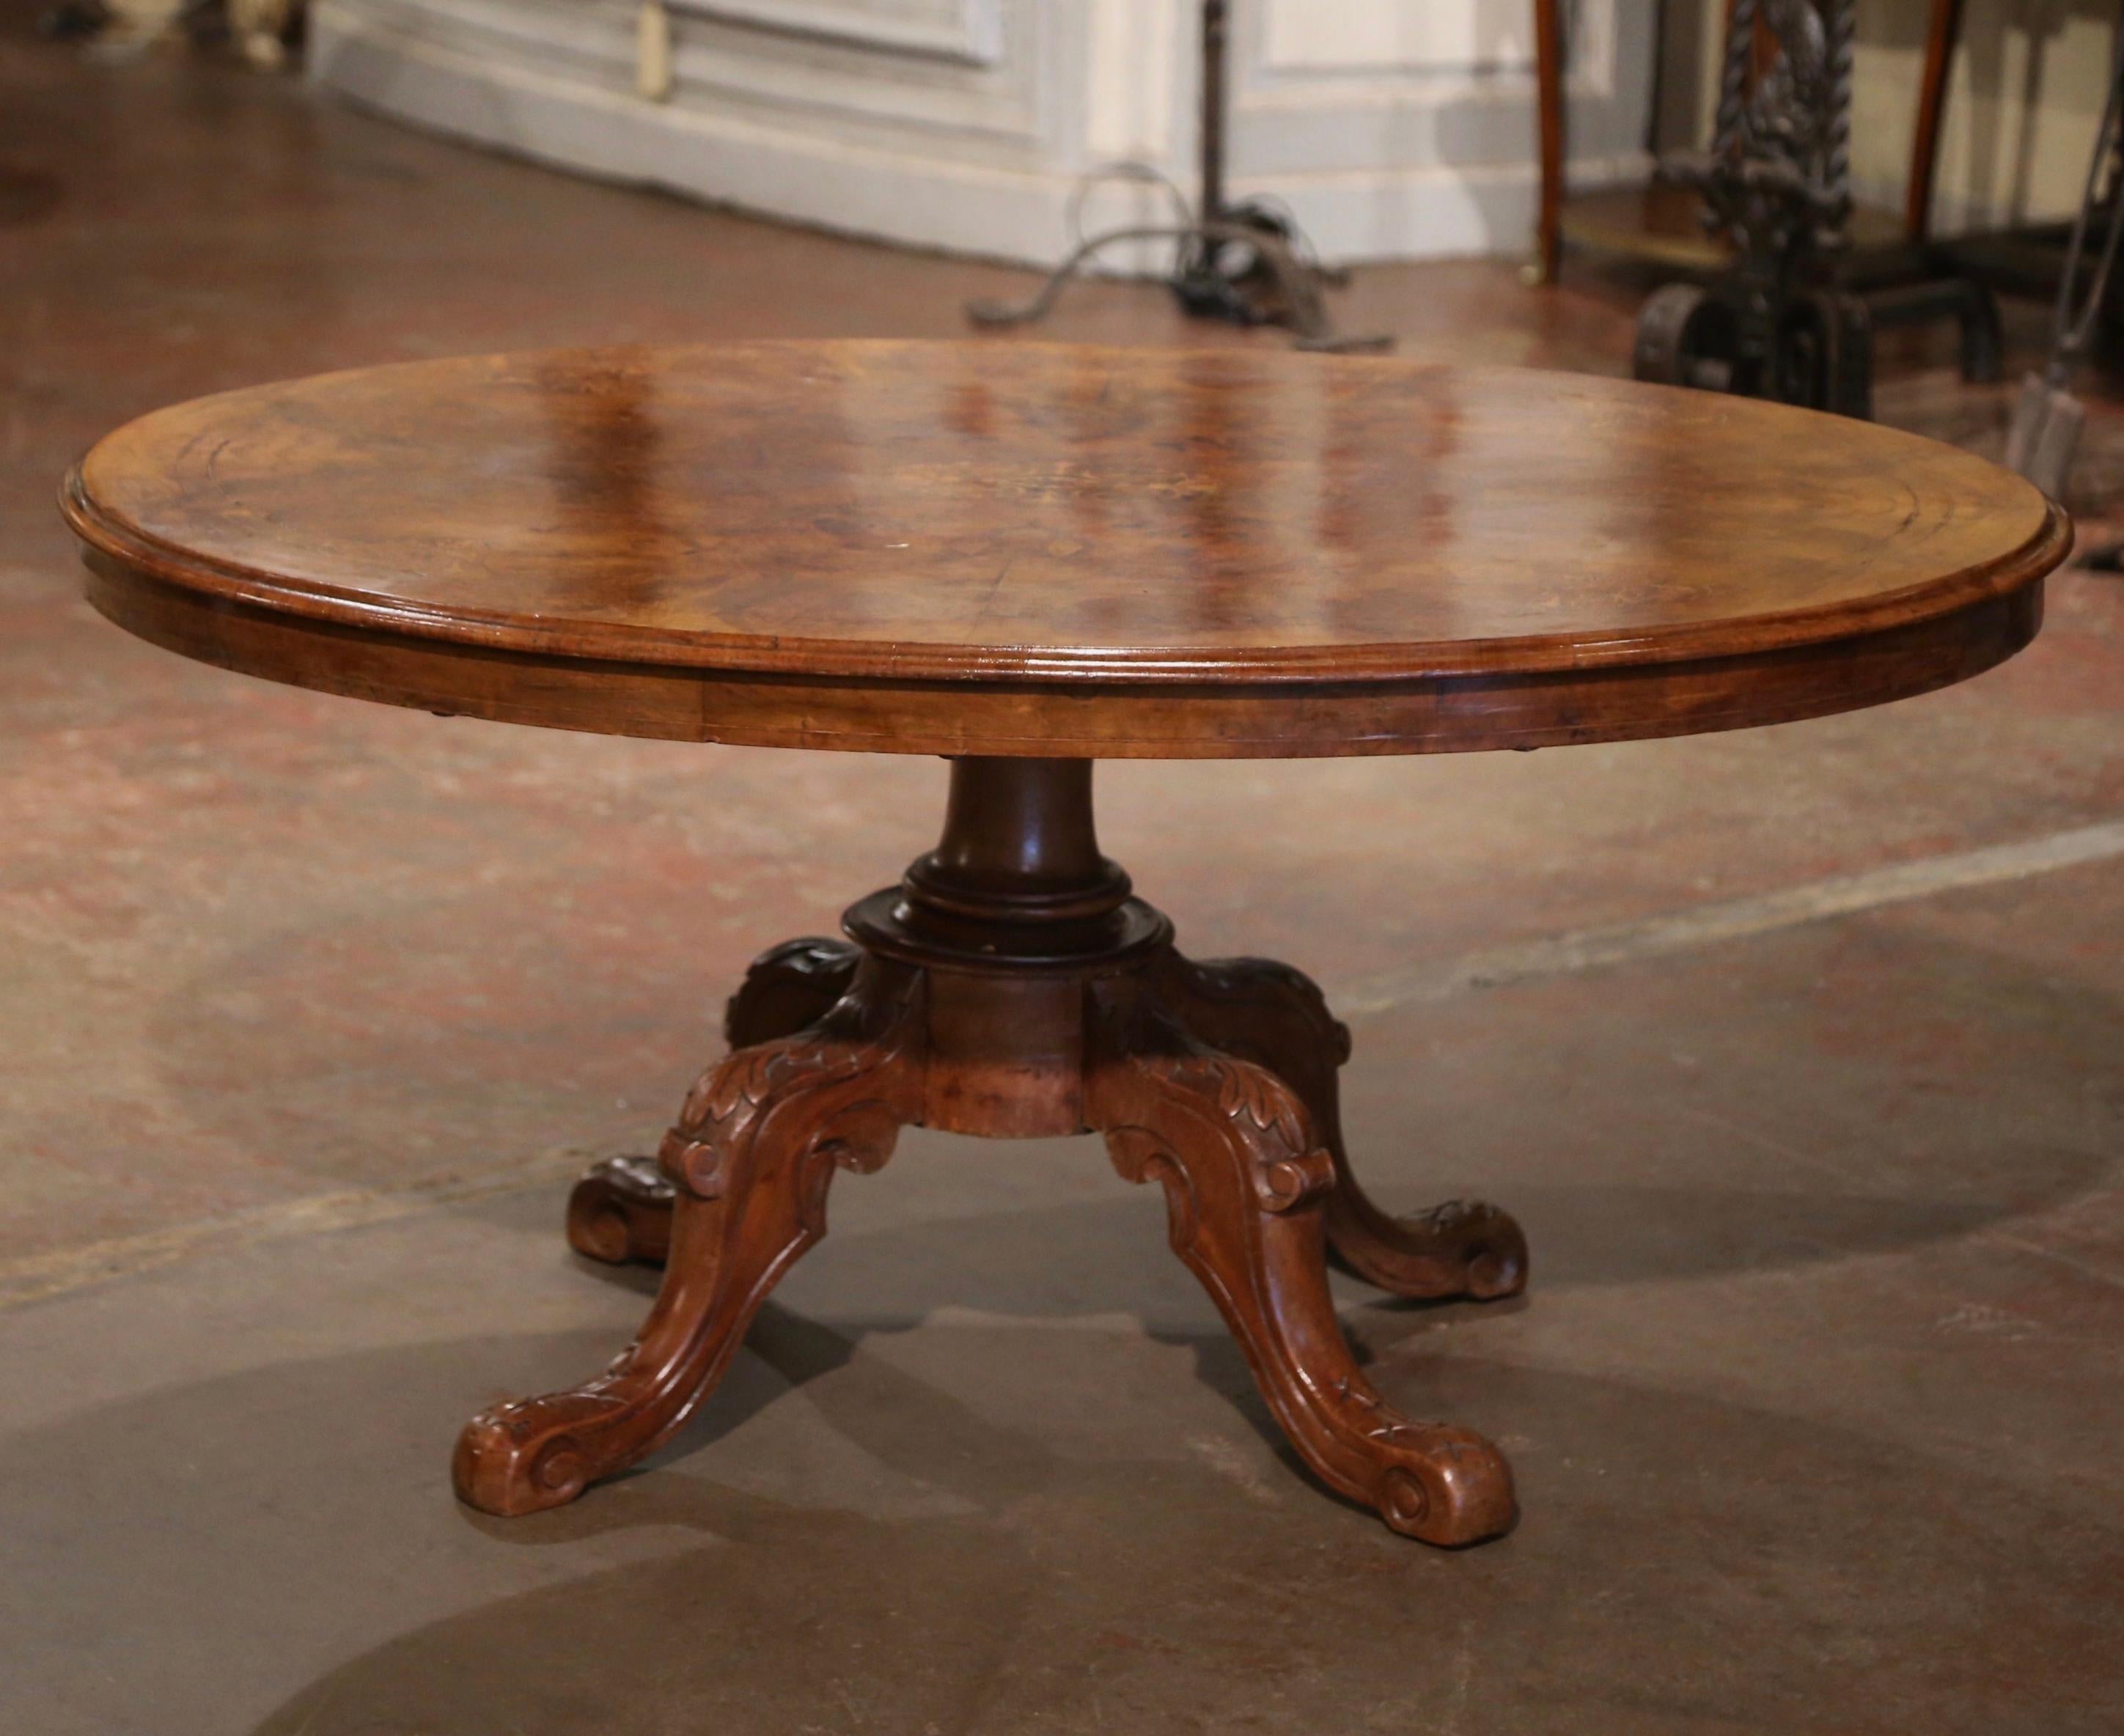 Decorate a den or living room with this elegant antique cocktail table. Crafted in England circa 1860, the large table stands on a center carved walnut stem supporting four curved legs decorated with acanthus leaves and ending in scroll feet. The